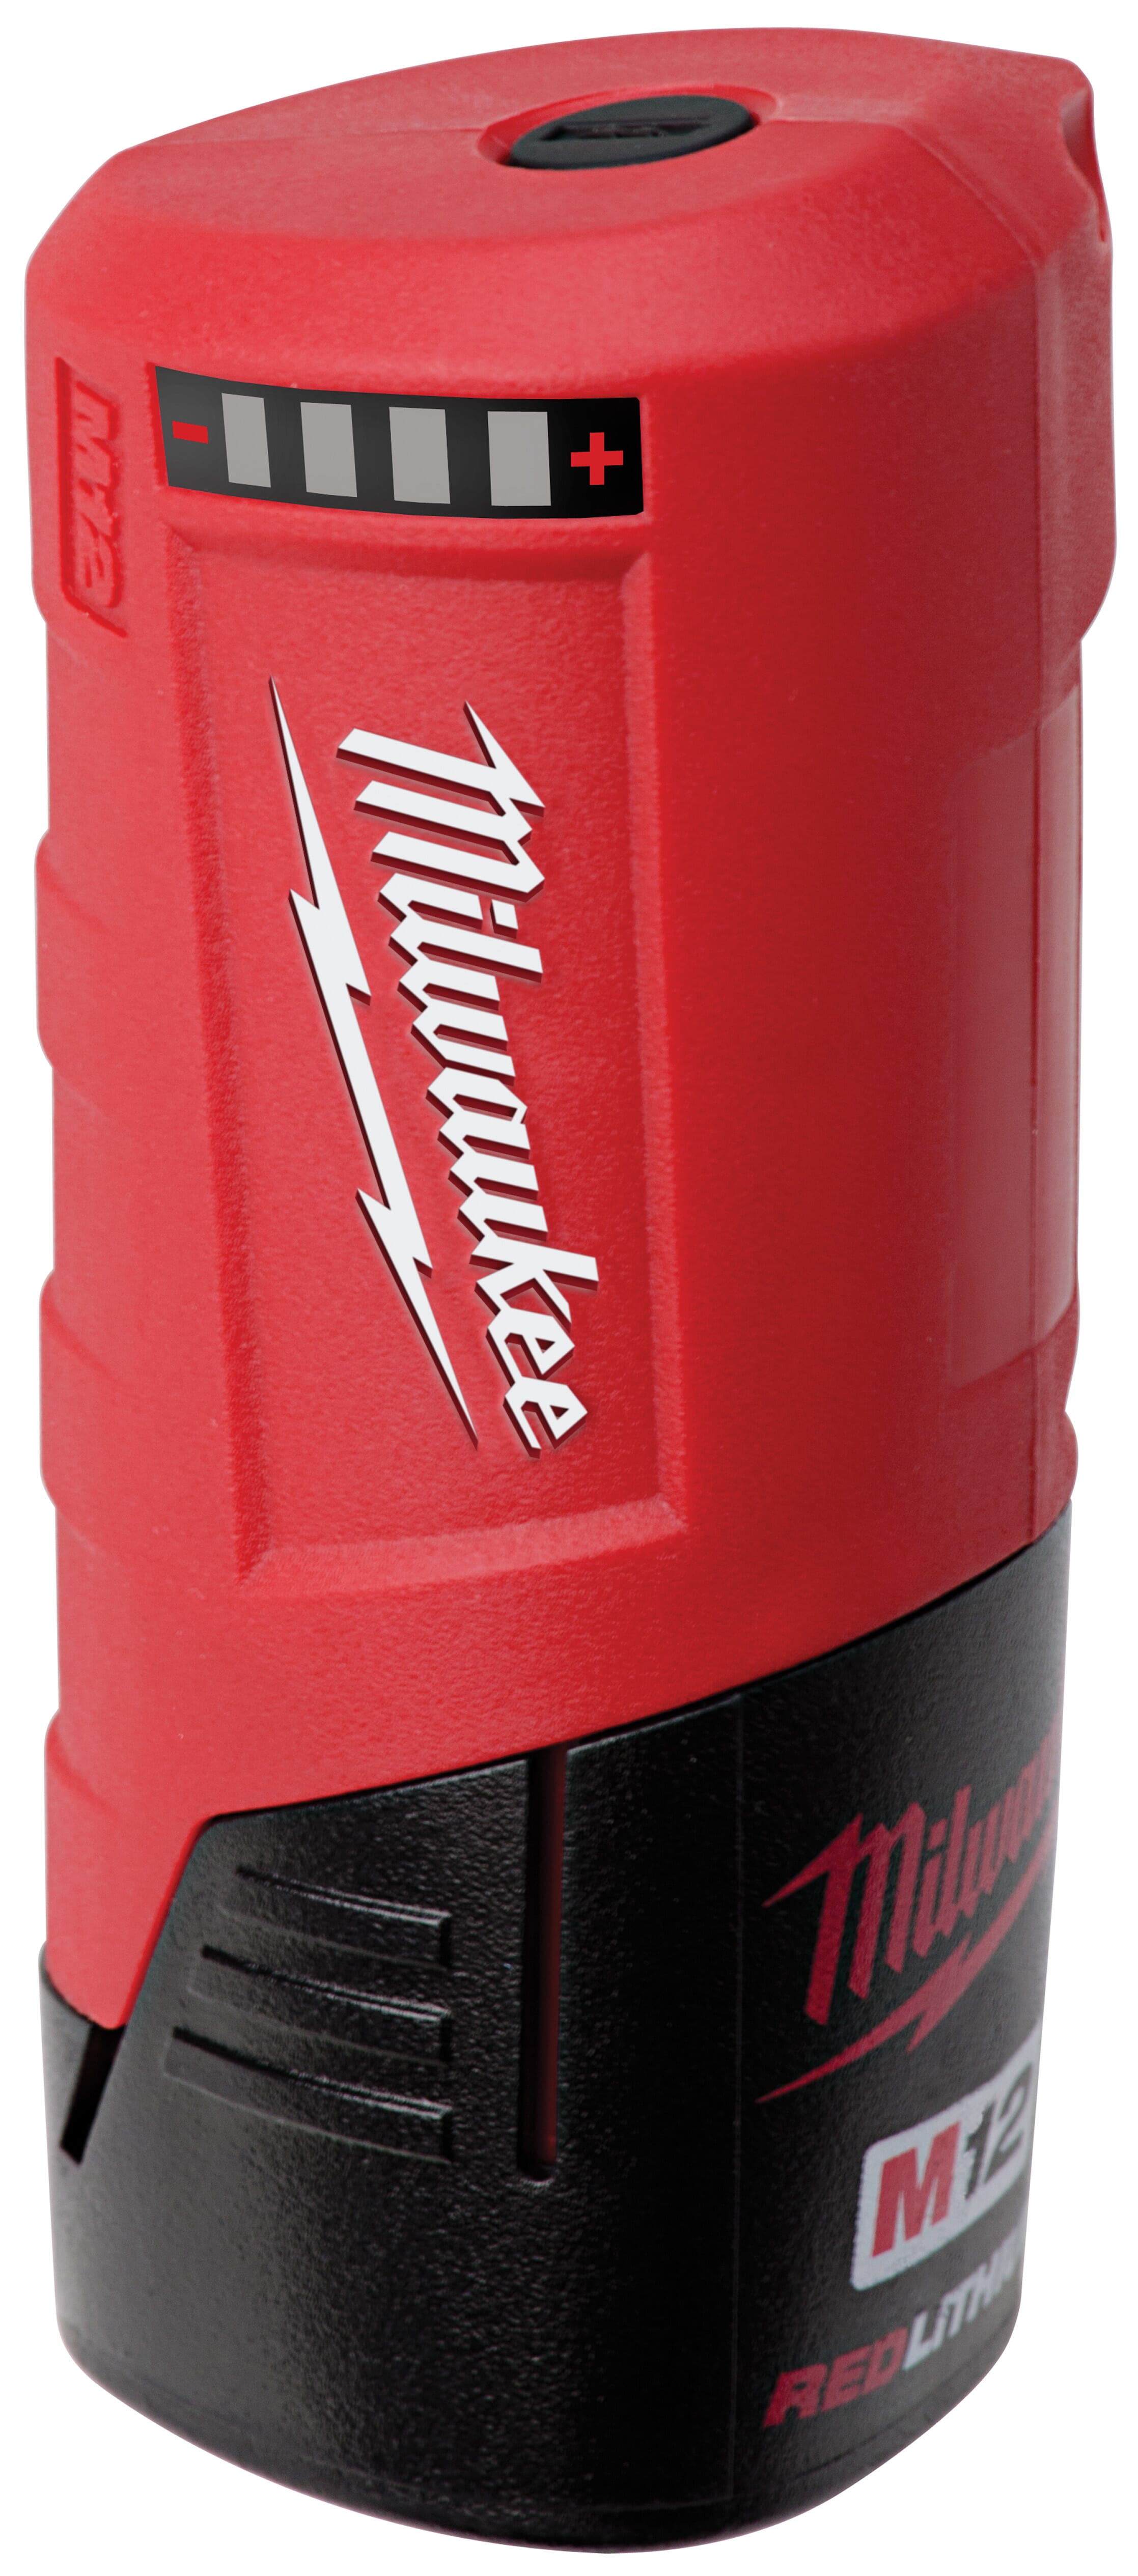 Milwaukee® M12™ 49-24-2310 Power Source, 1.5/2/3/4 Ah Lithium-Ion Battery, 12 VDC Charge, For Use With M12™ Battery Pack and Heated Gear